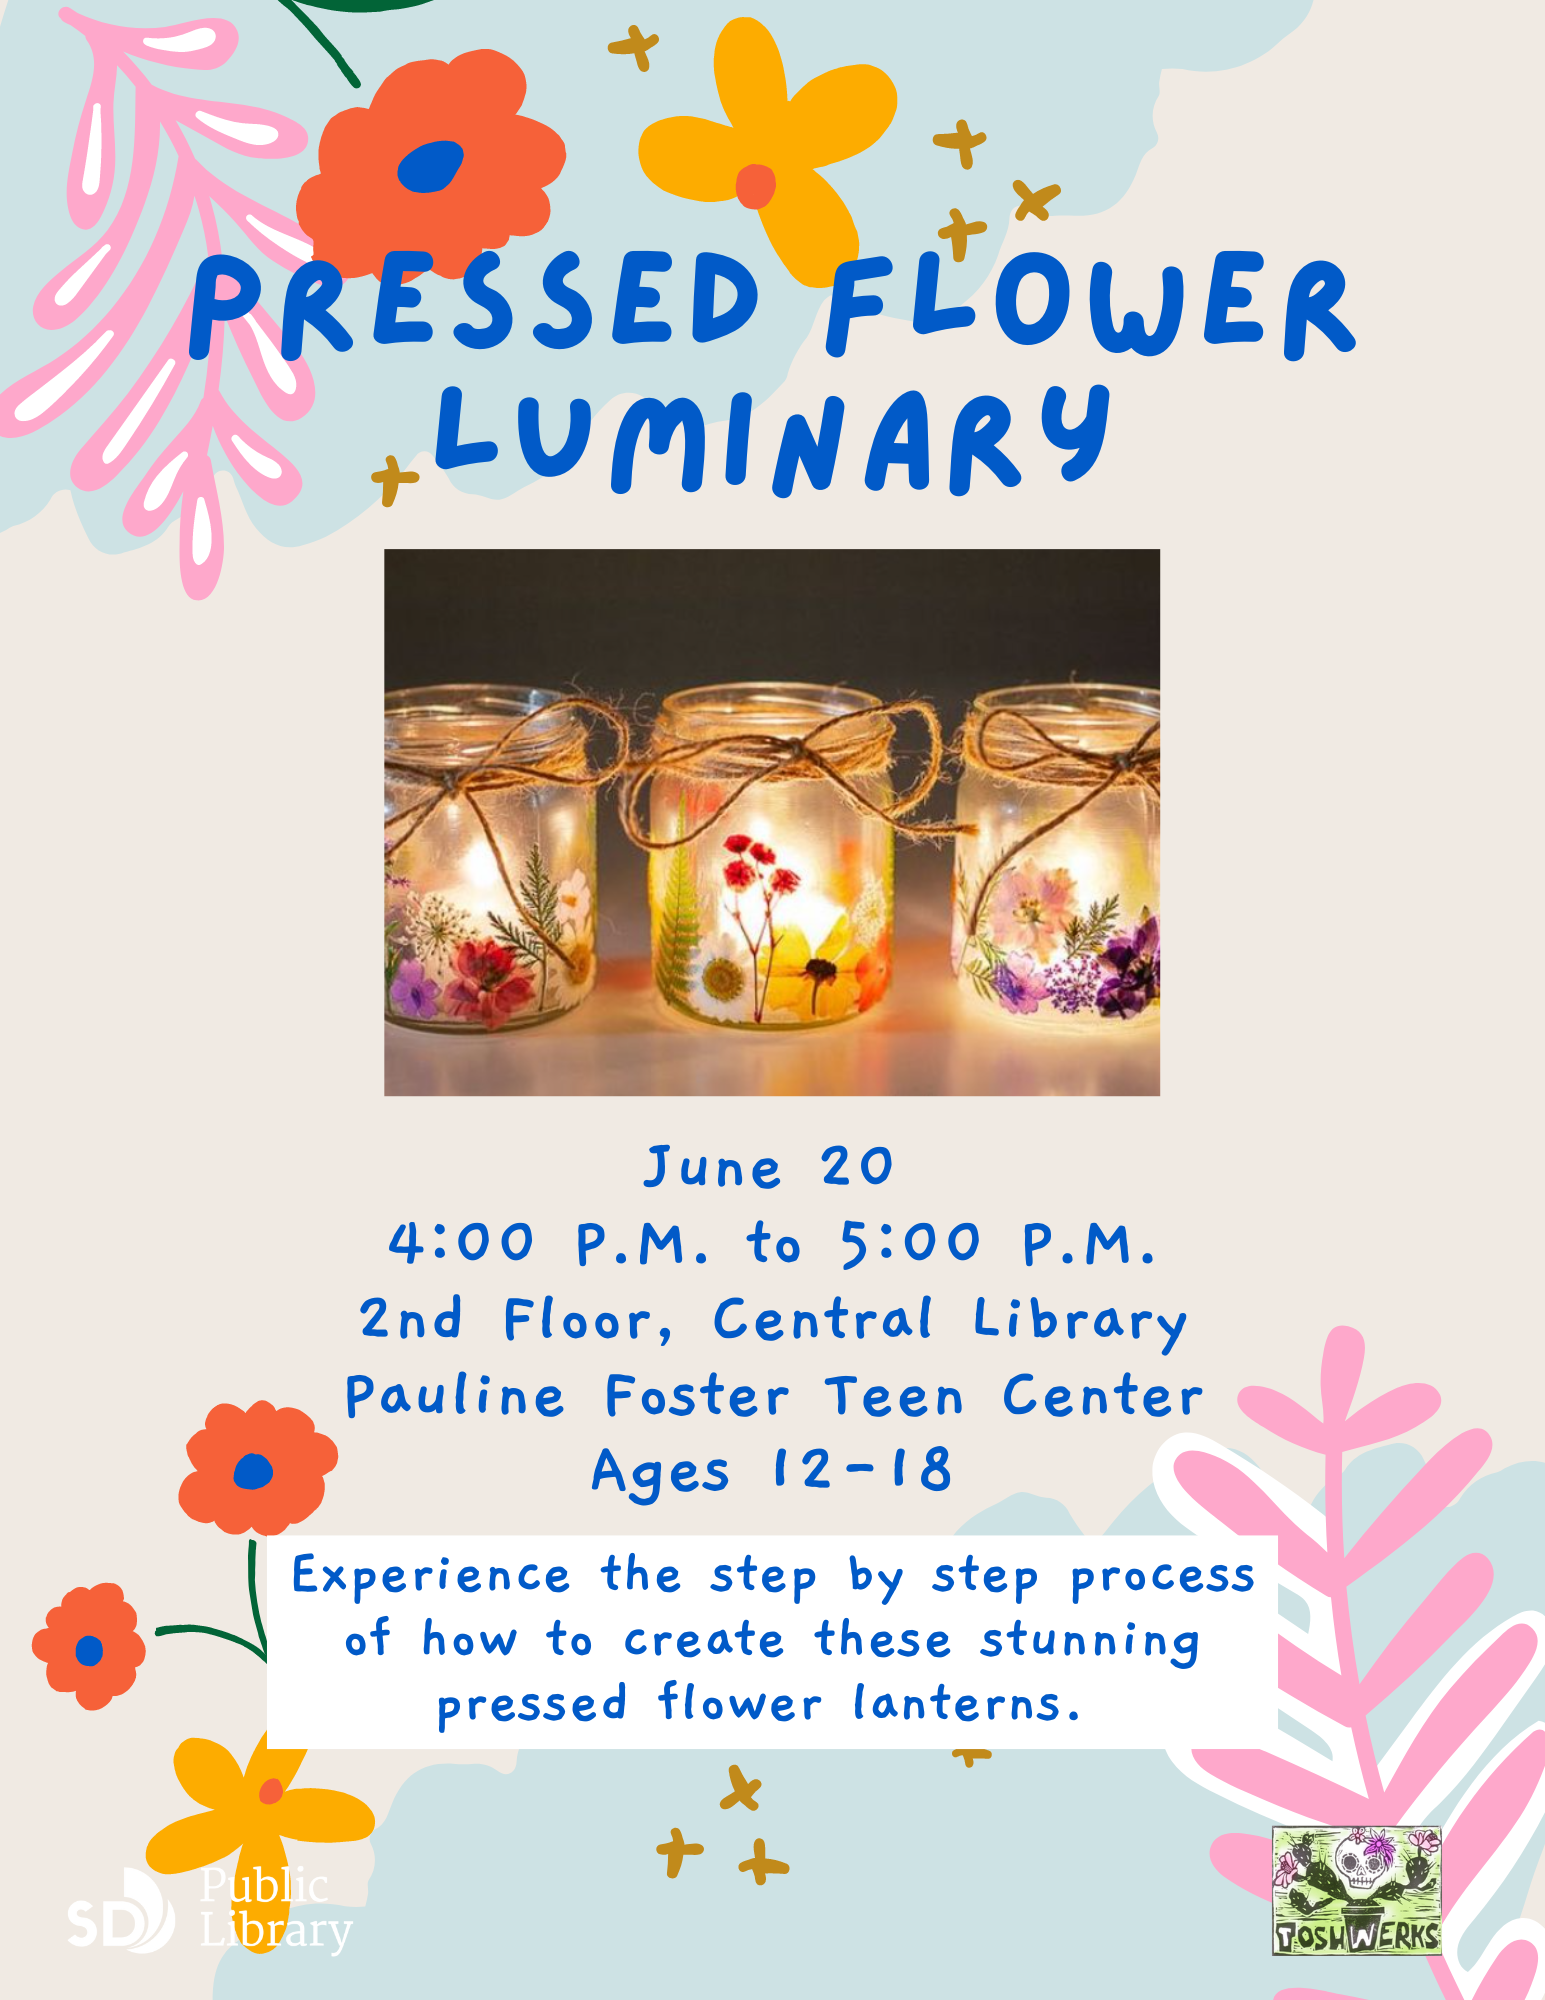 Pressed Flower Luminary. June 20, 4 to 5 P.M. 2nd Floor, Central Library. Pauline Foster Teen Center. Ages 12-18. Experience the step by step process of how to create these stunning pressed flower lanterns. 